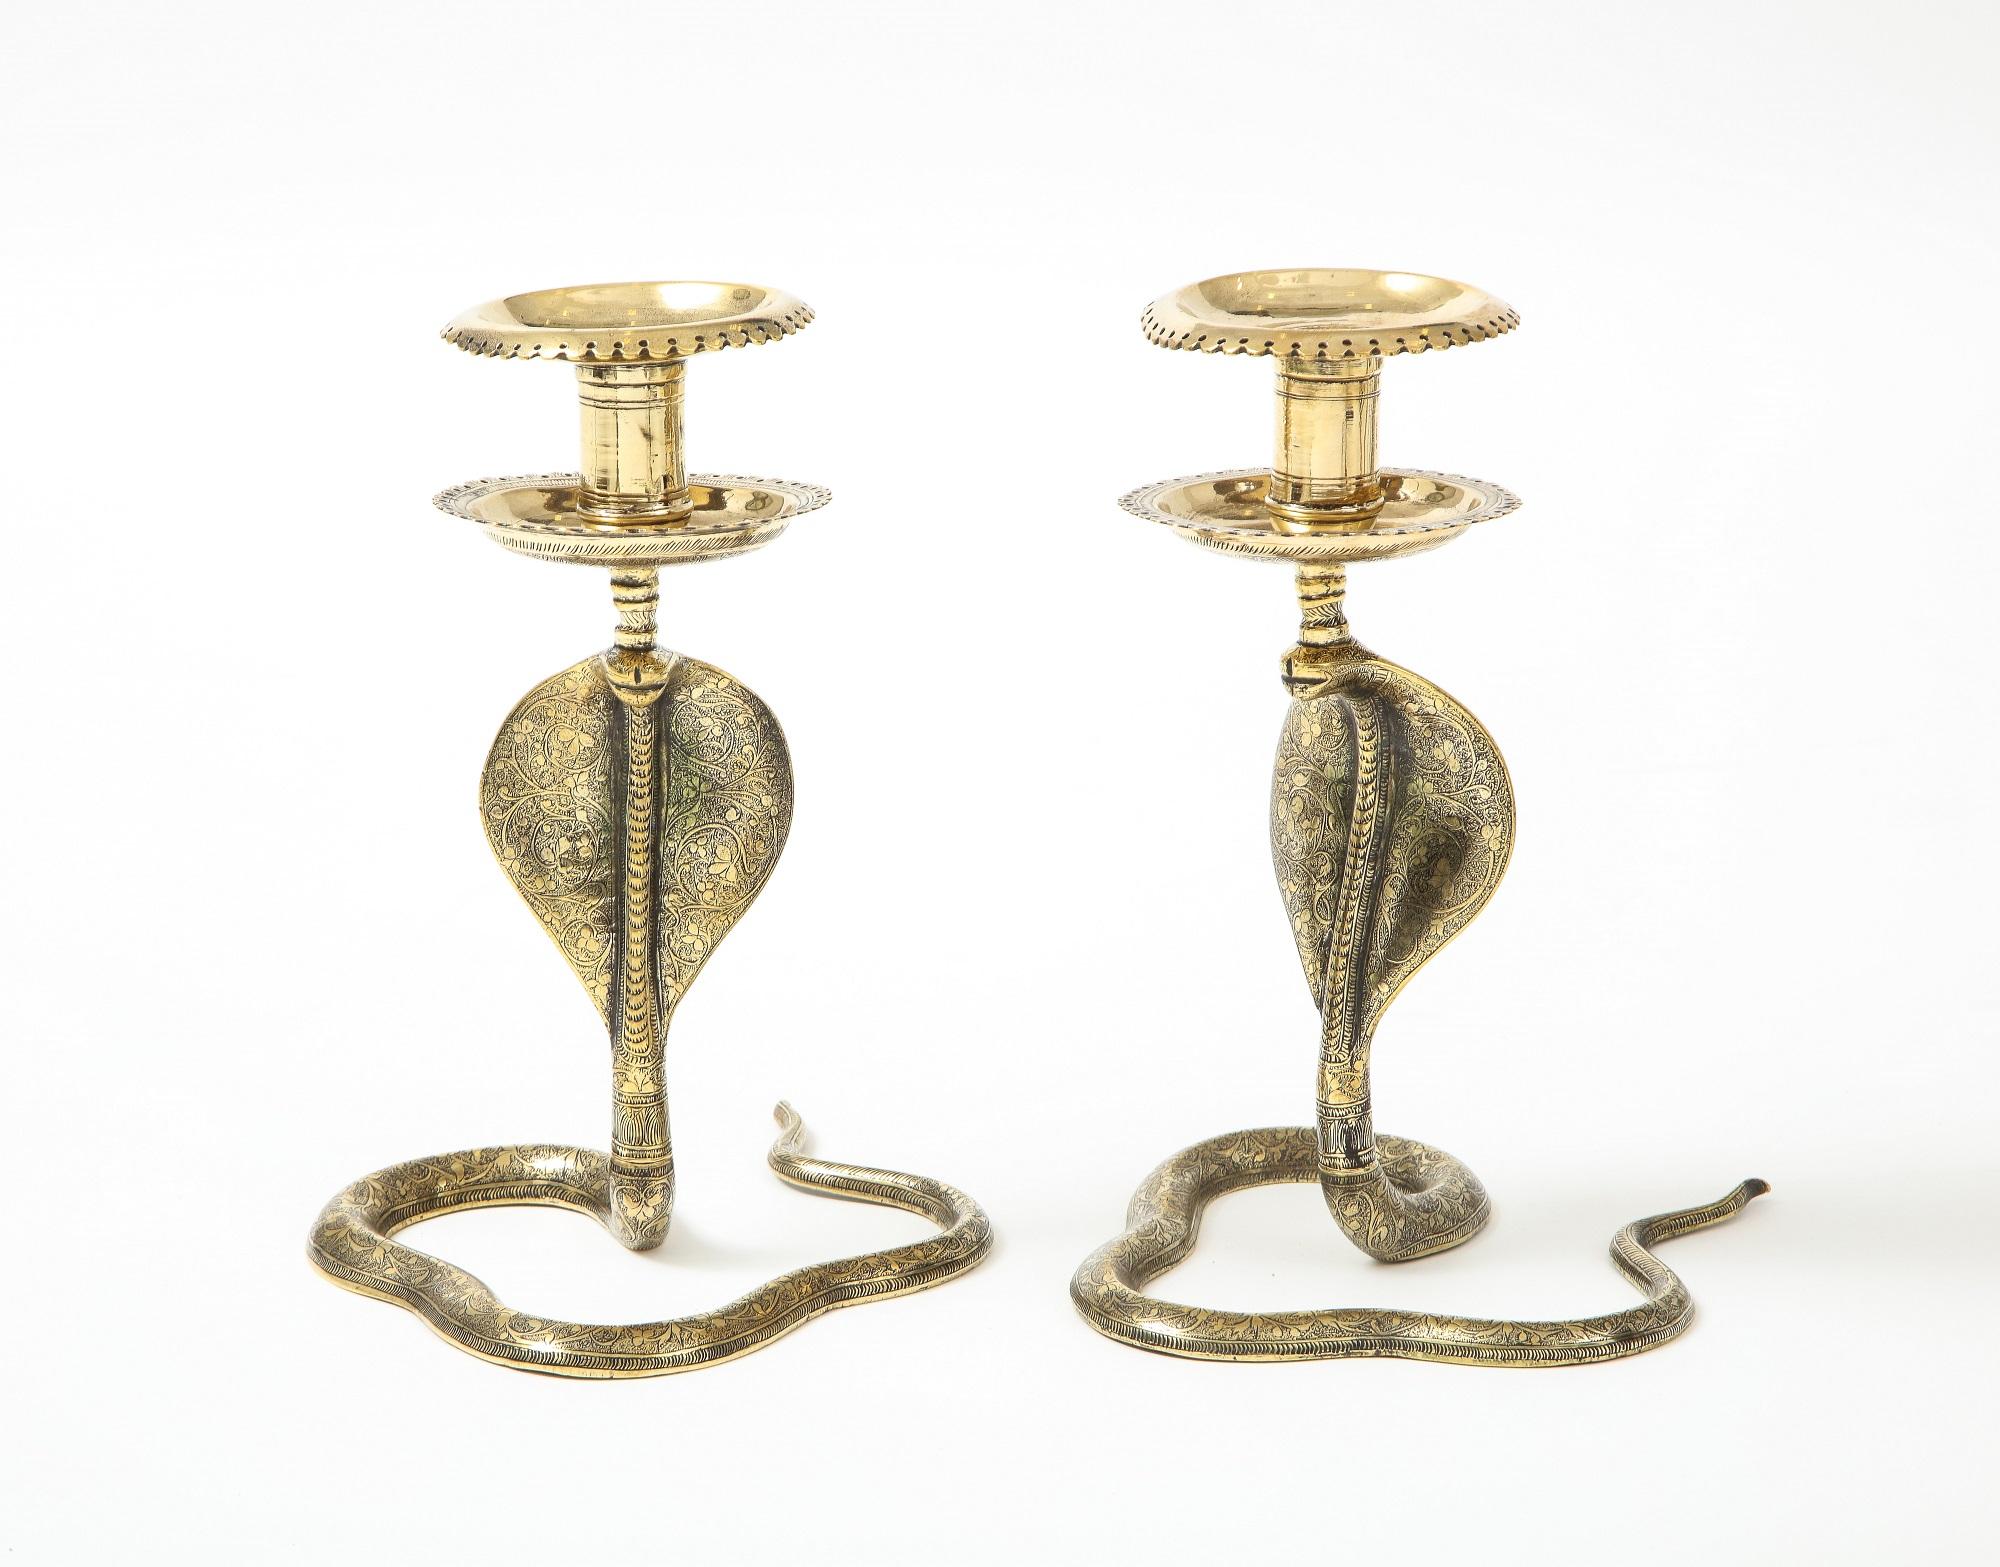 A brass pair of candelsticks each in the shape of a cobra. Cast brass has etched details on the length of the body and across the cup surface. Mid 20th Century.